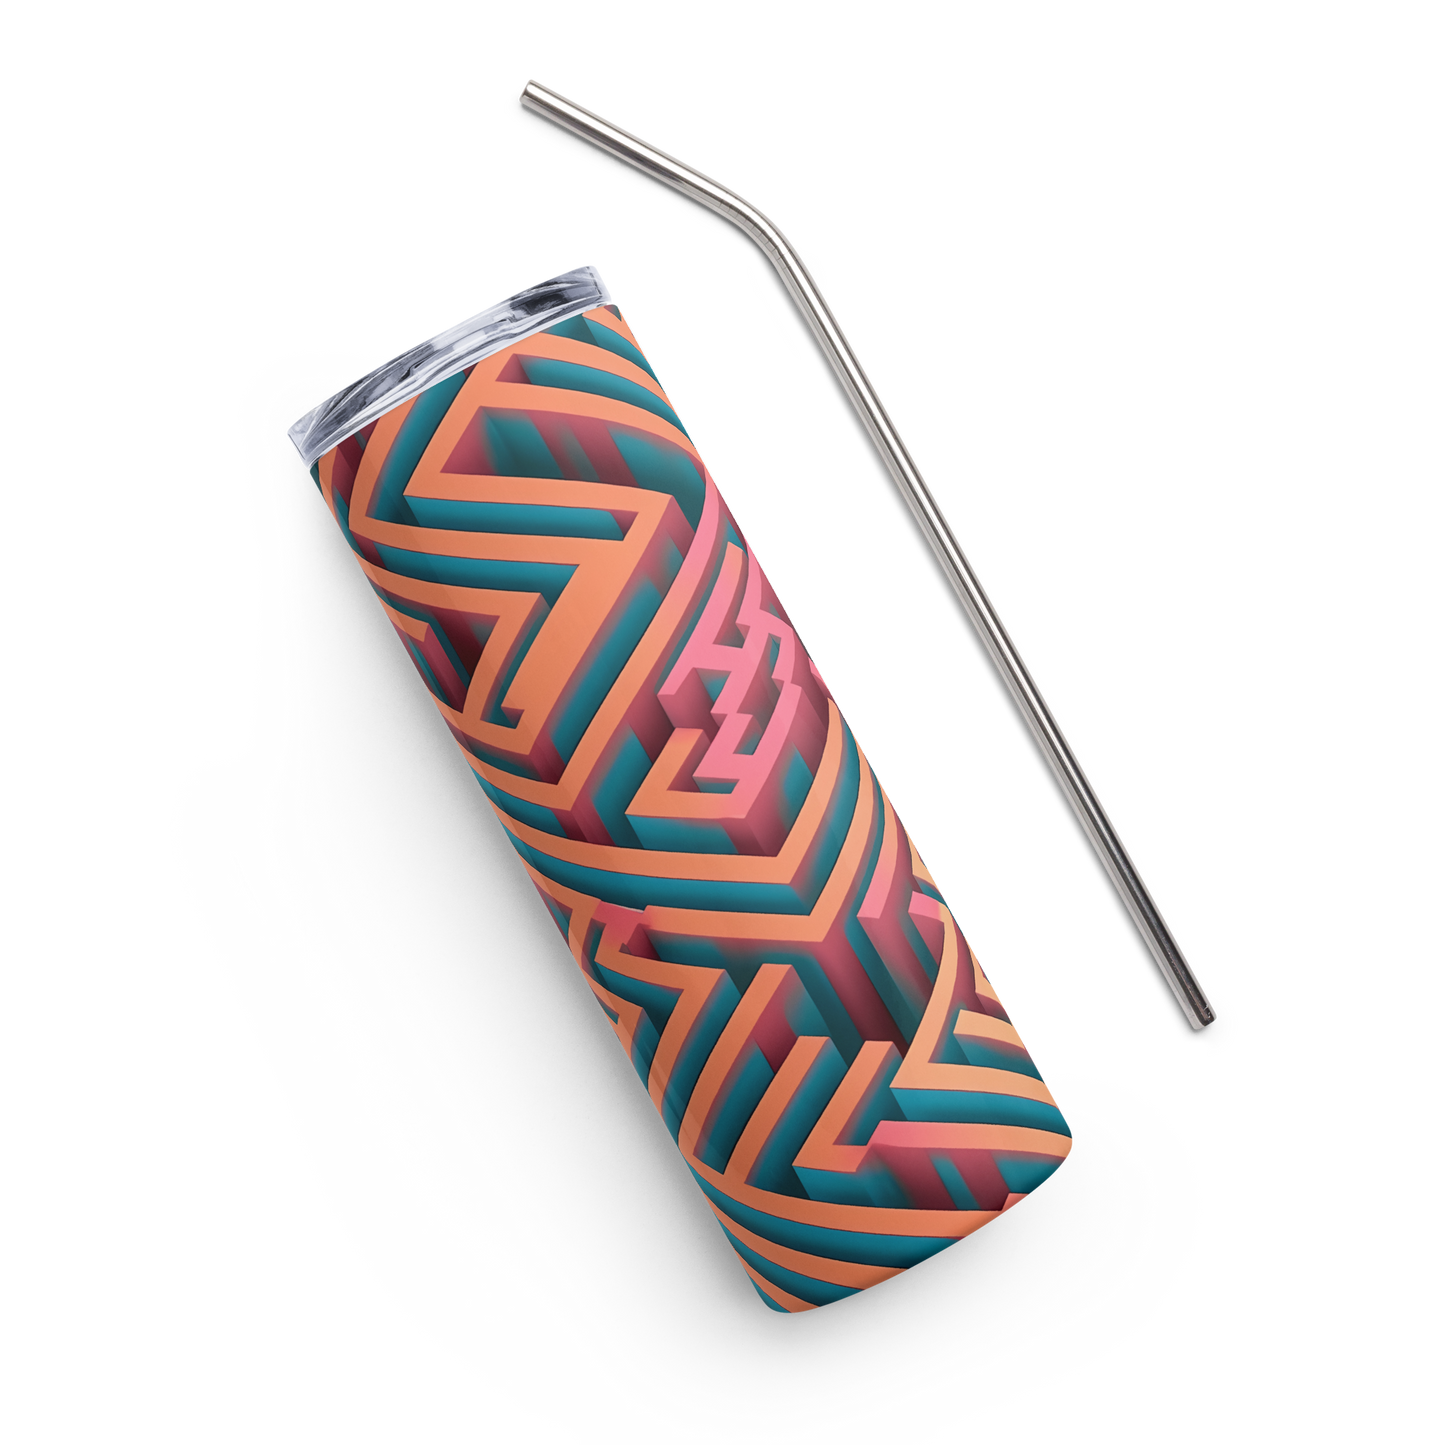 3D Maze Illusion | 3D Patterns | Stainless Steel Tumbler - #1